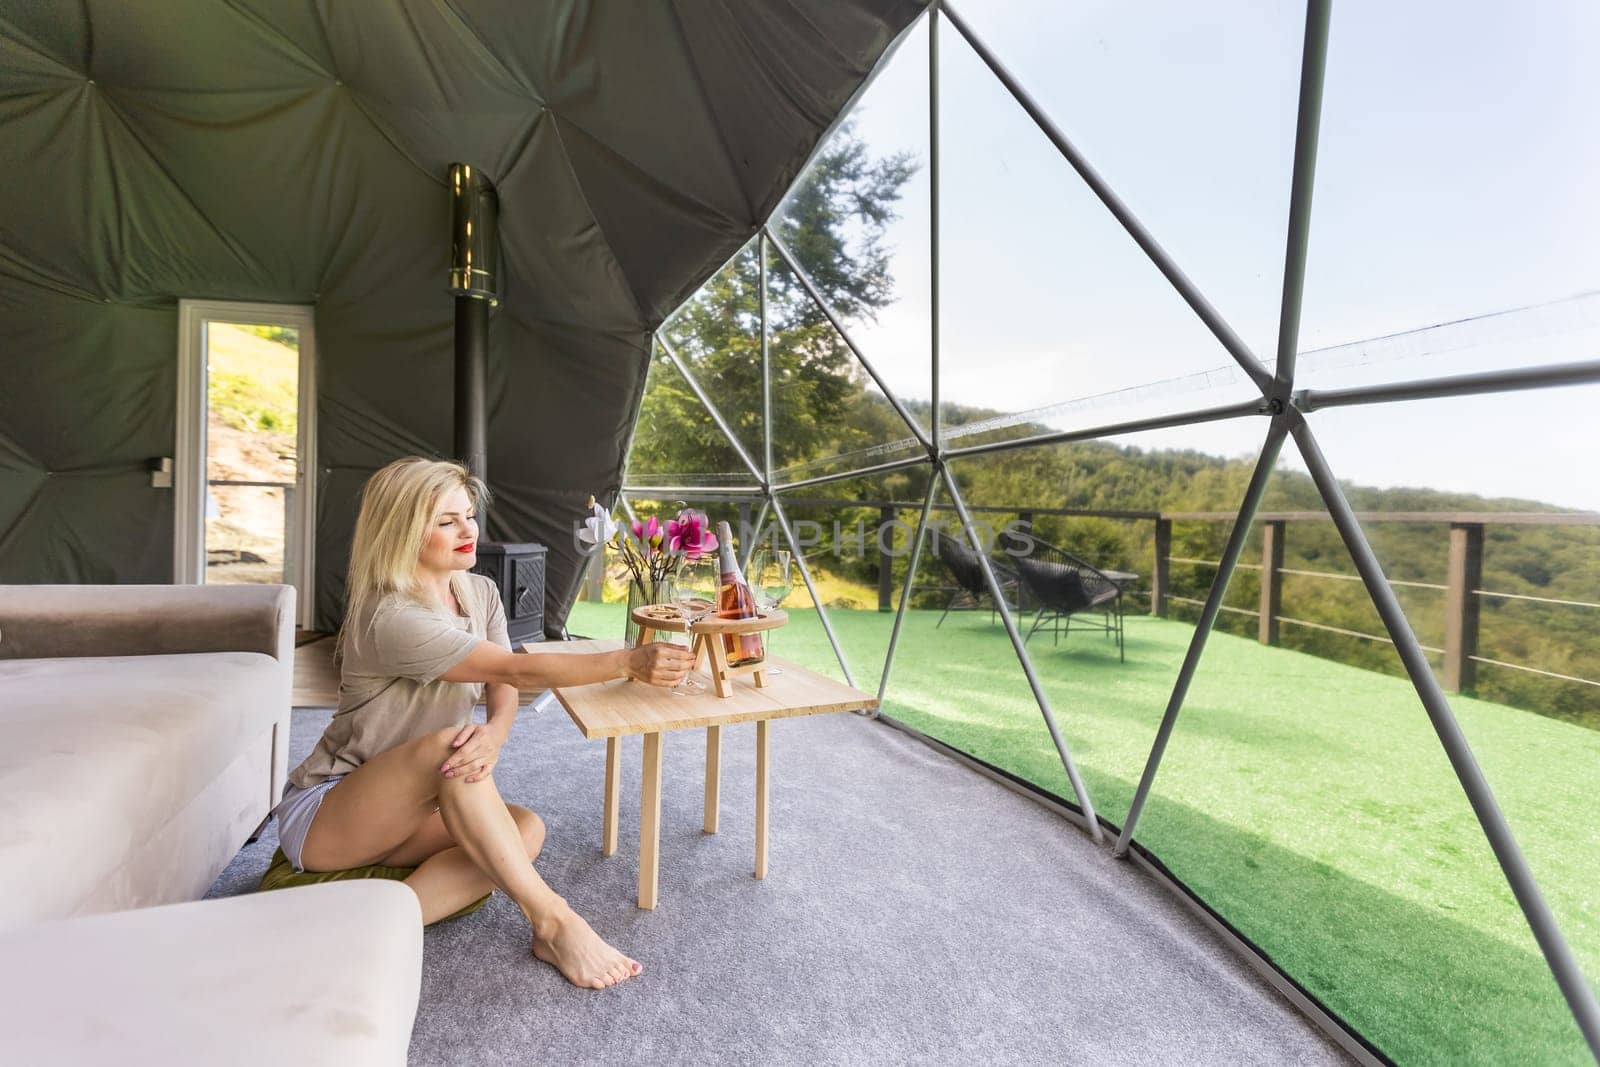 Transparent bubble tent at glamping, Lush forest around and interior. woman resting in glamping.